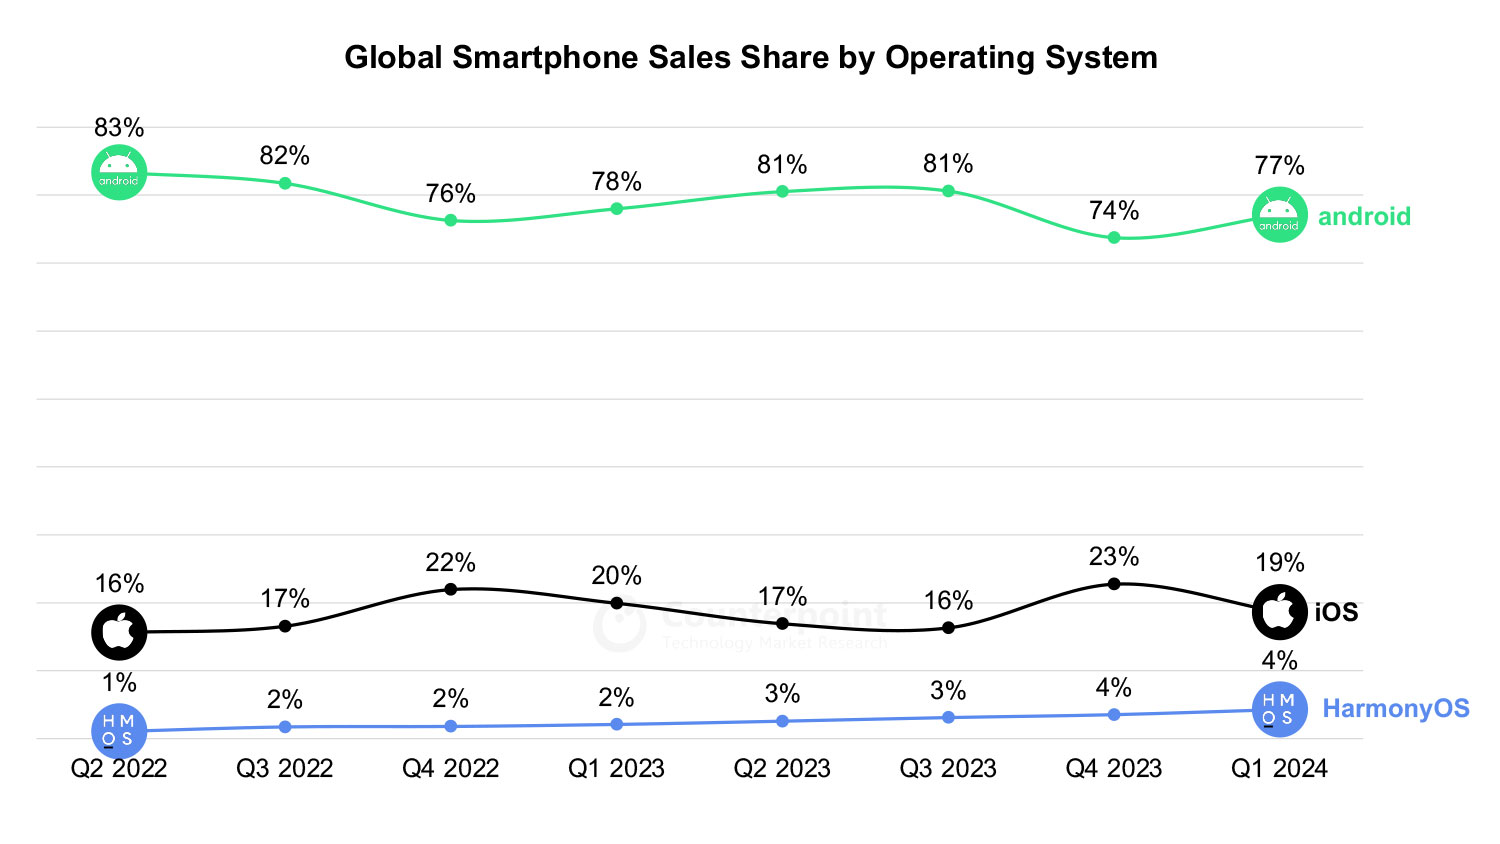 Android vs iOS - Global Smartphone OS Share Q1 2024